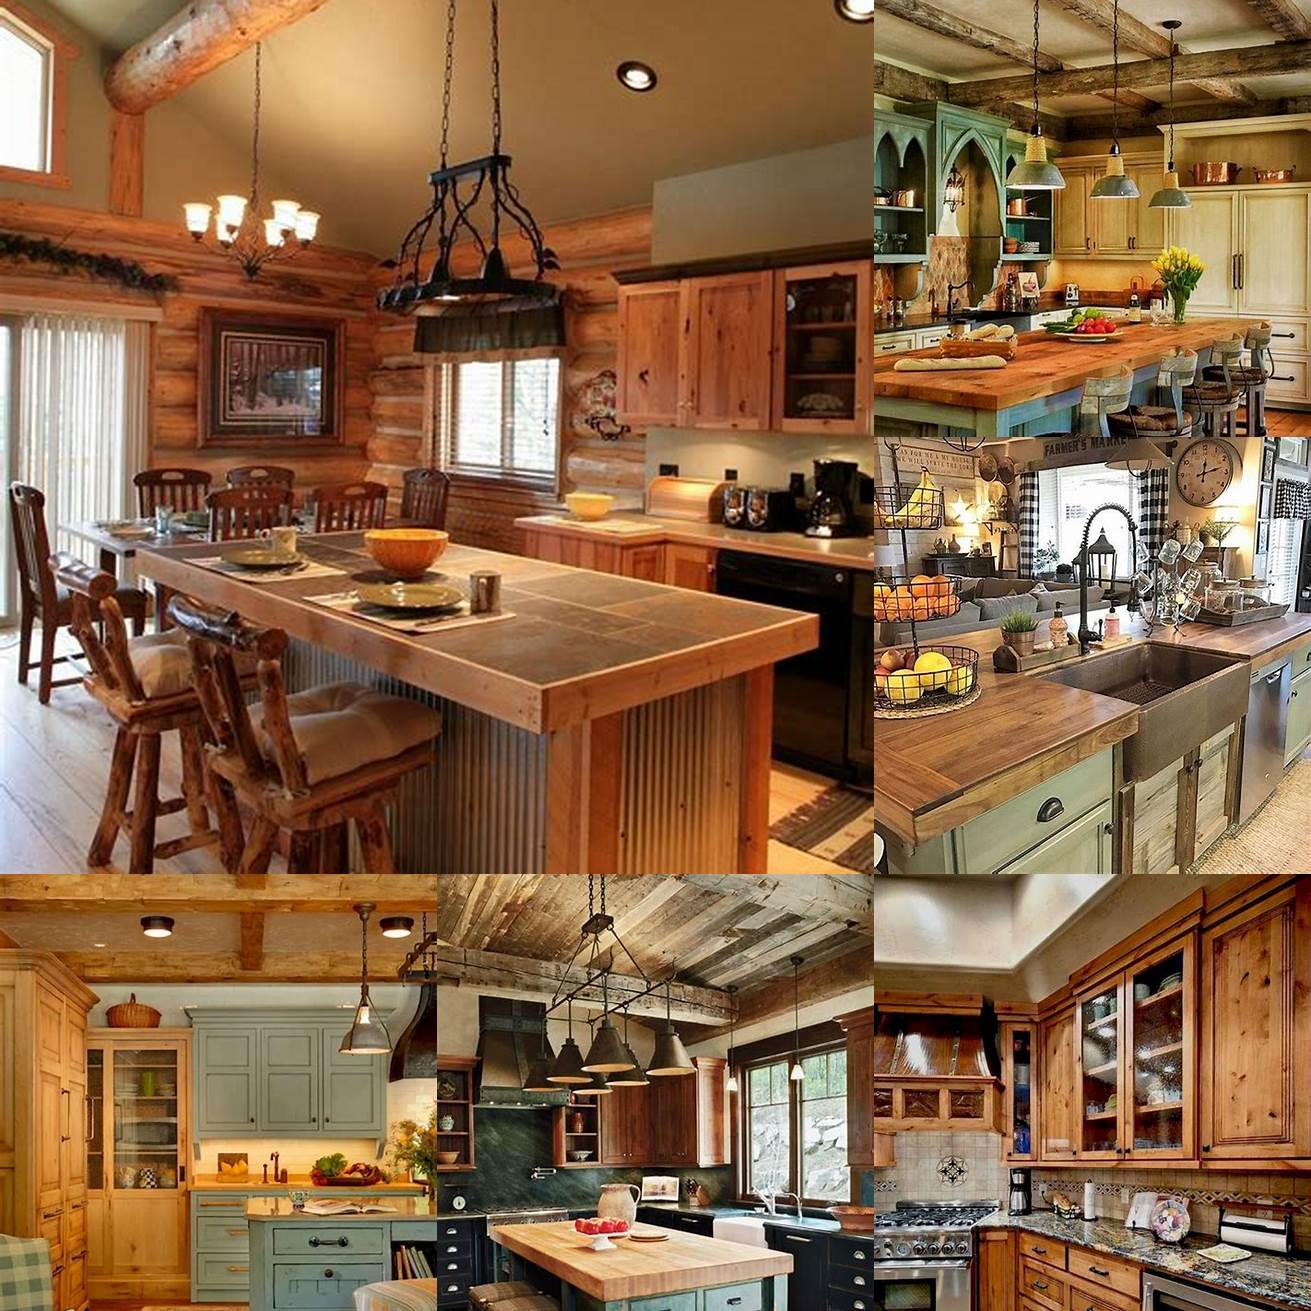 Pine cabinets can add to the cozy inviting feel of a farmhouse kitchen